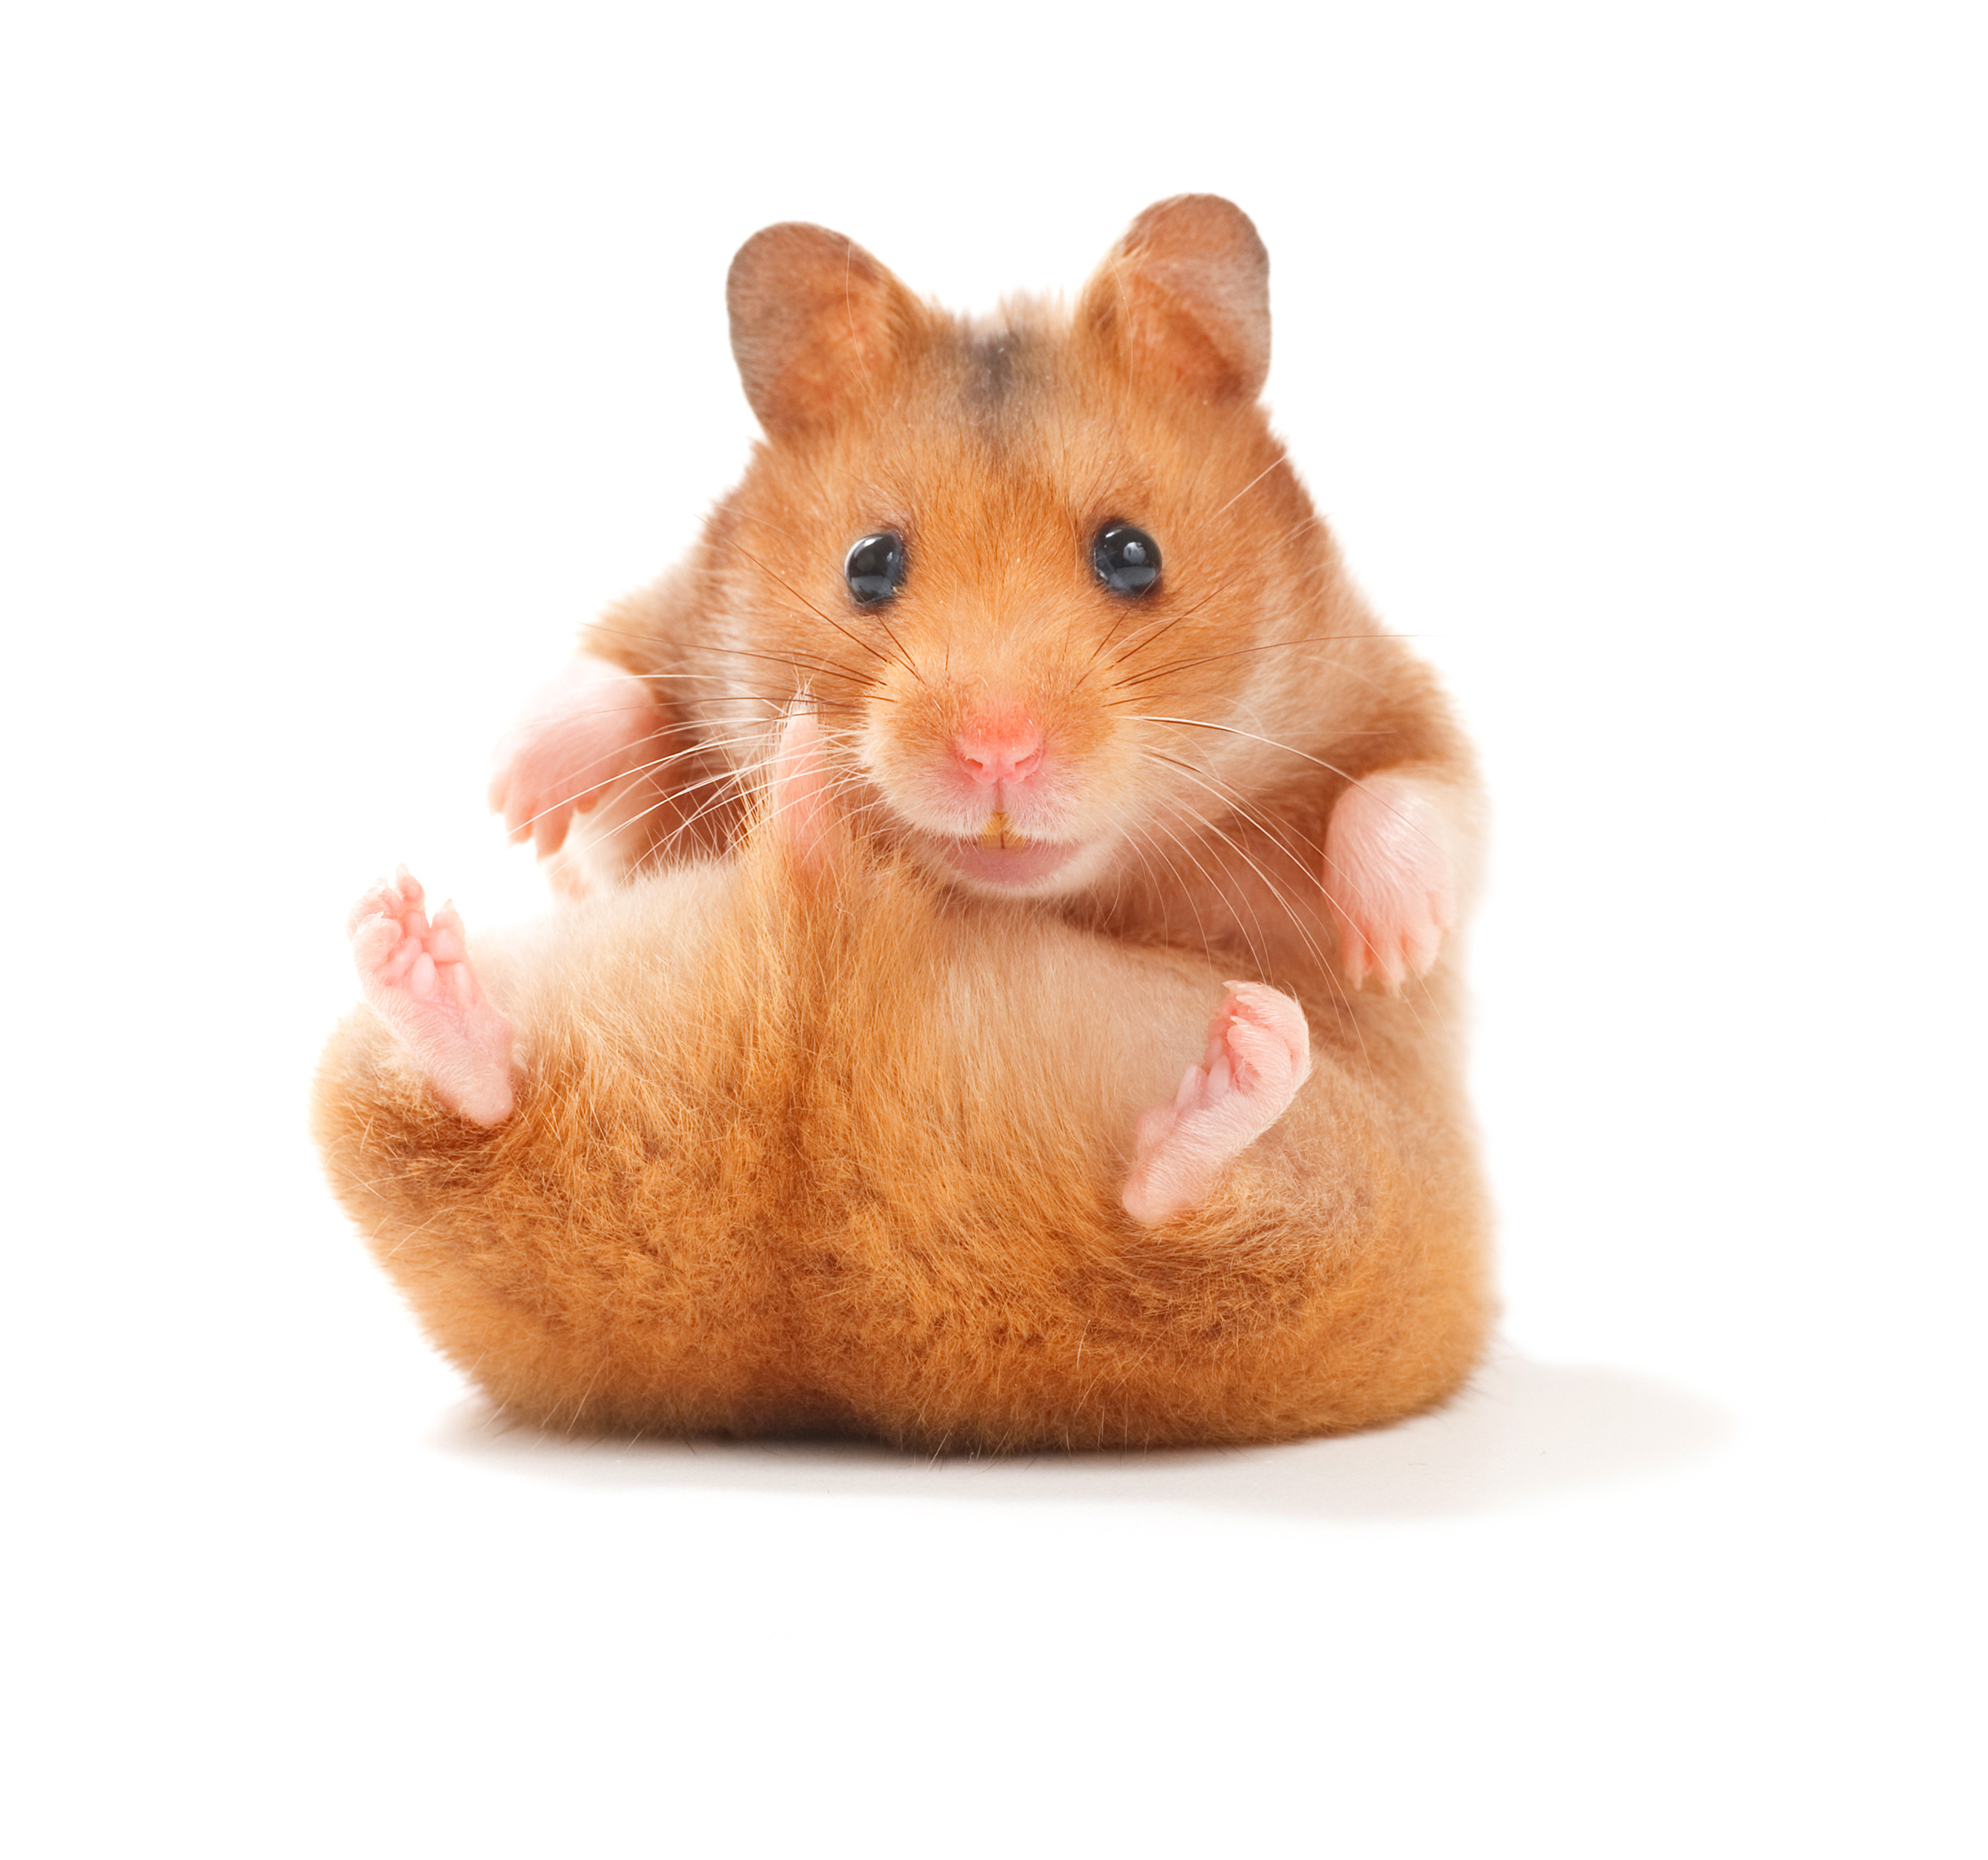 Hamster with visible tail